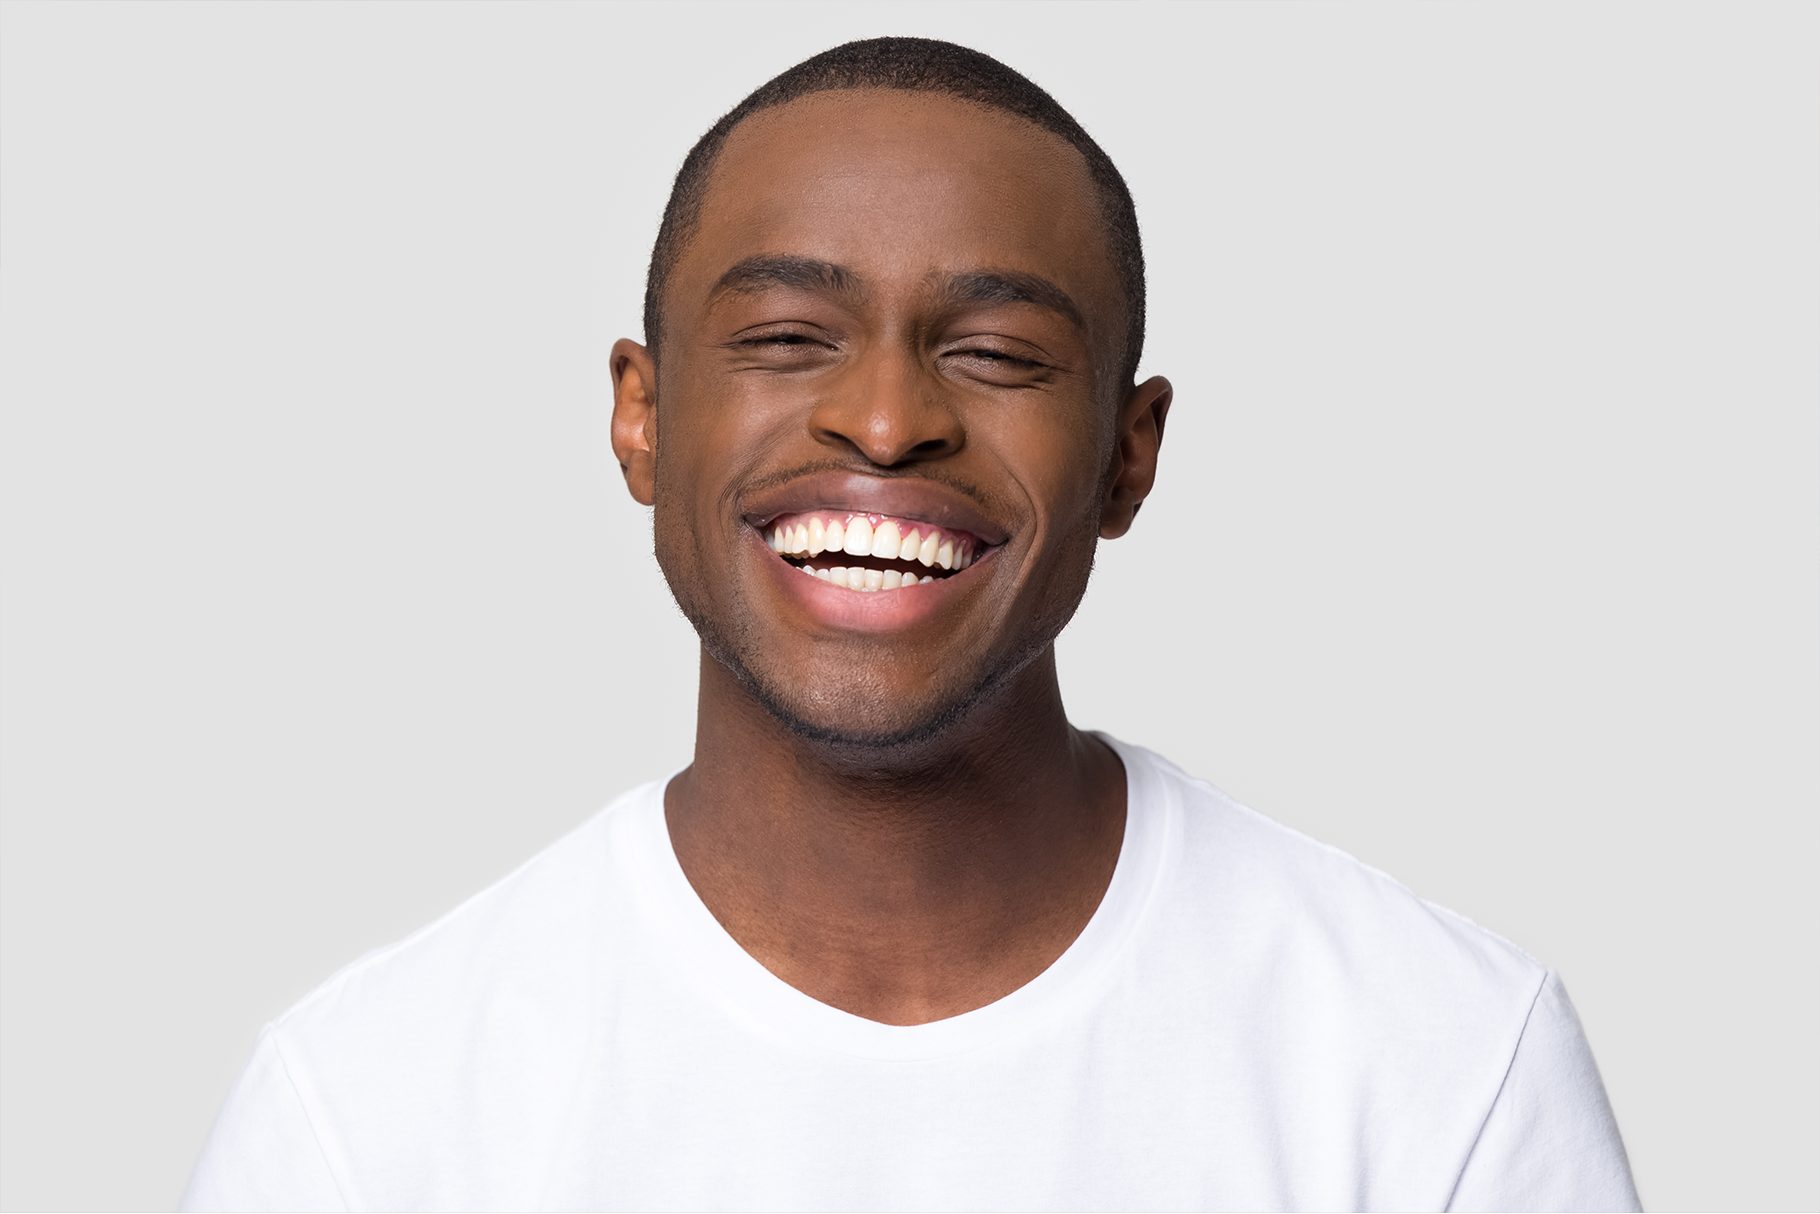 Smile 101® – How To Care For Your Teeth